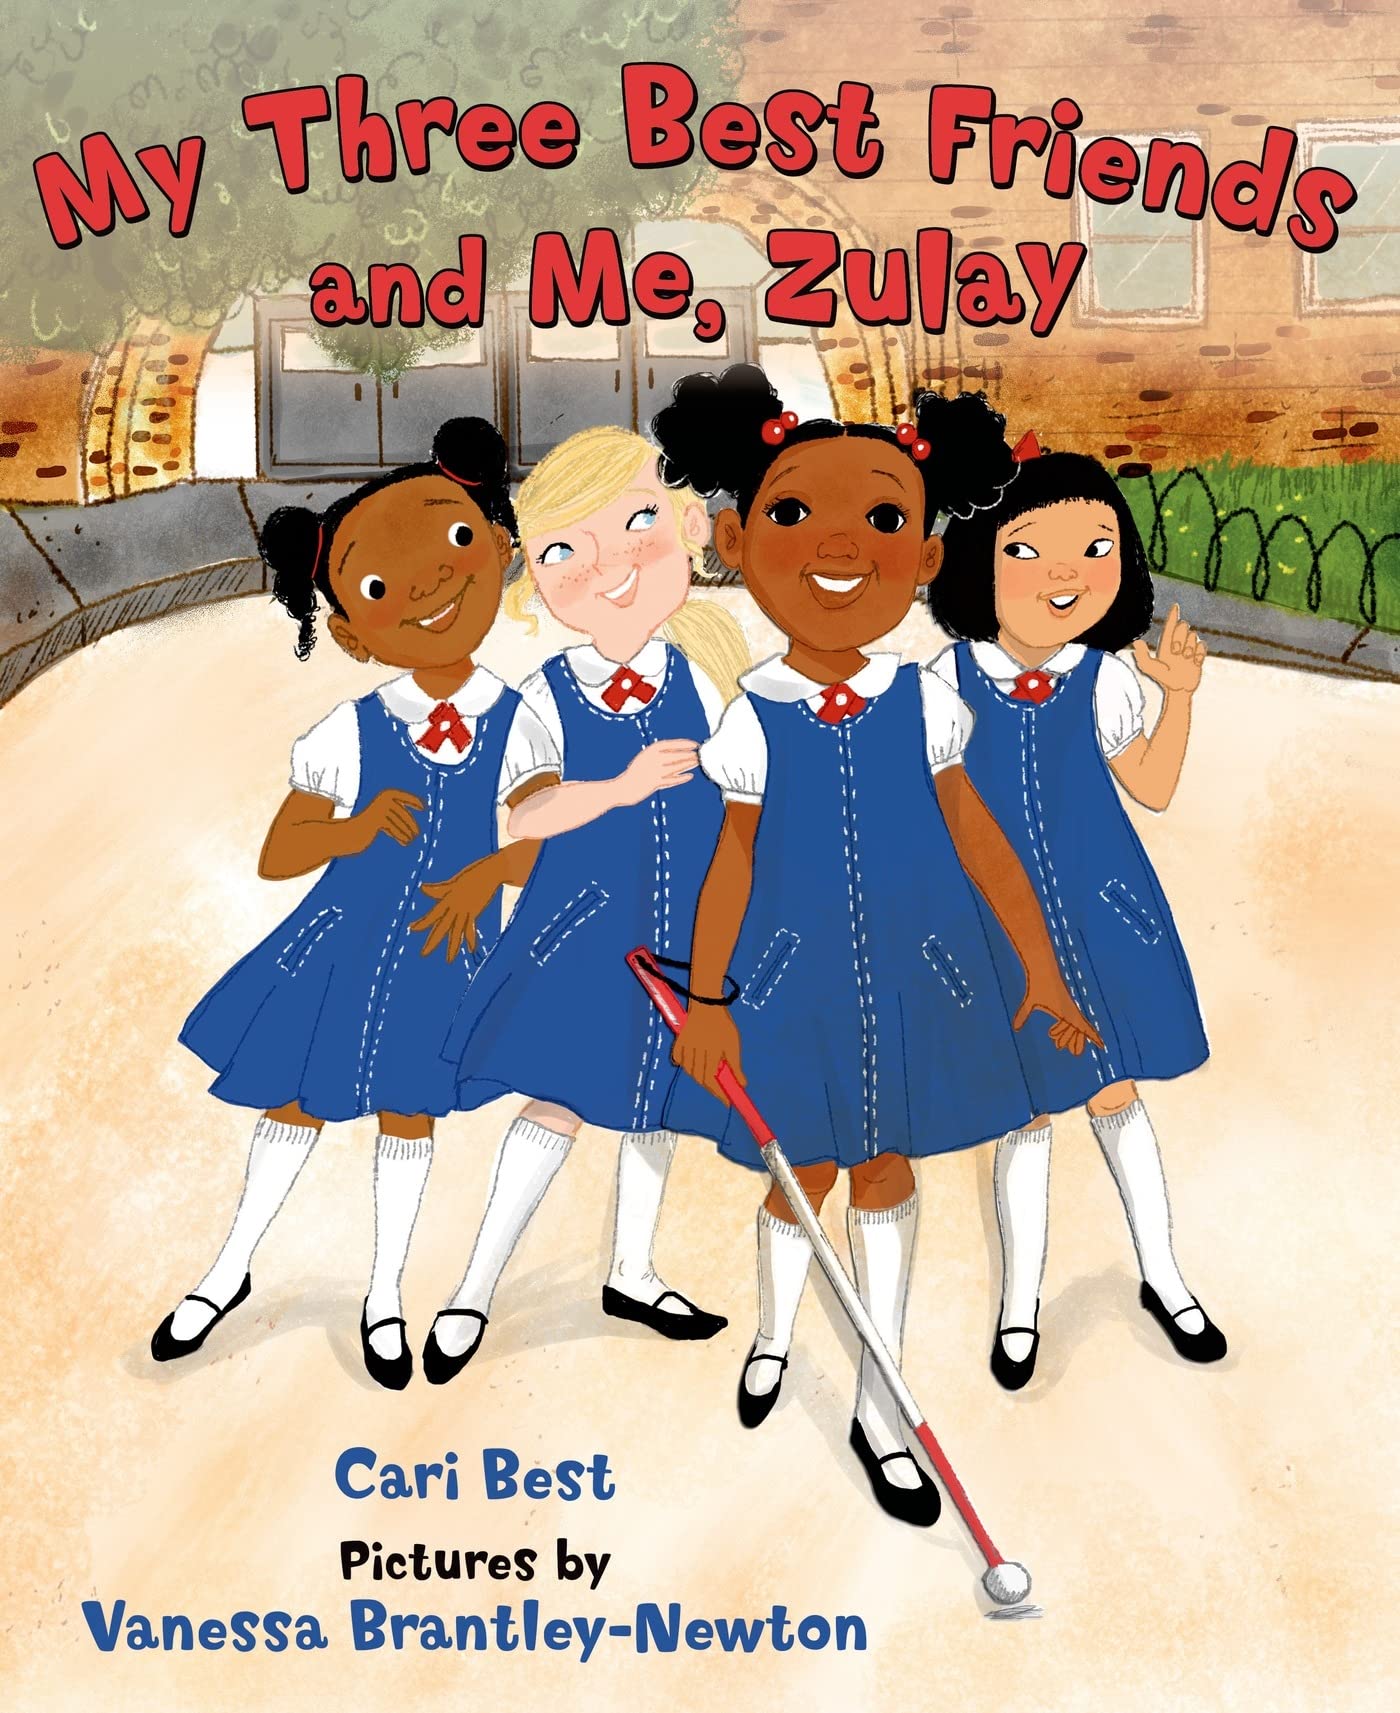 Four cartoon girls wearing matching blue dresses and white socks. They are all different ethnicities and one of them has a white and red cane. Above them, the title is written in red and reads my three best friends and me, Zulay.